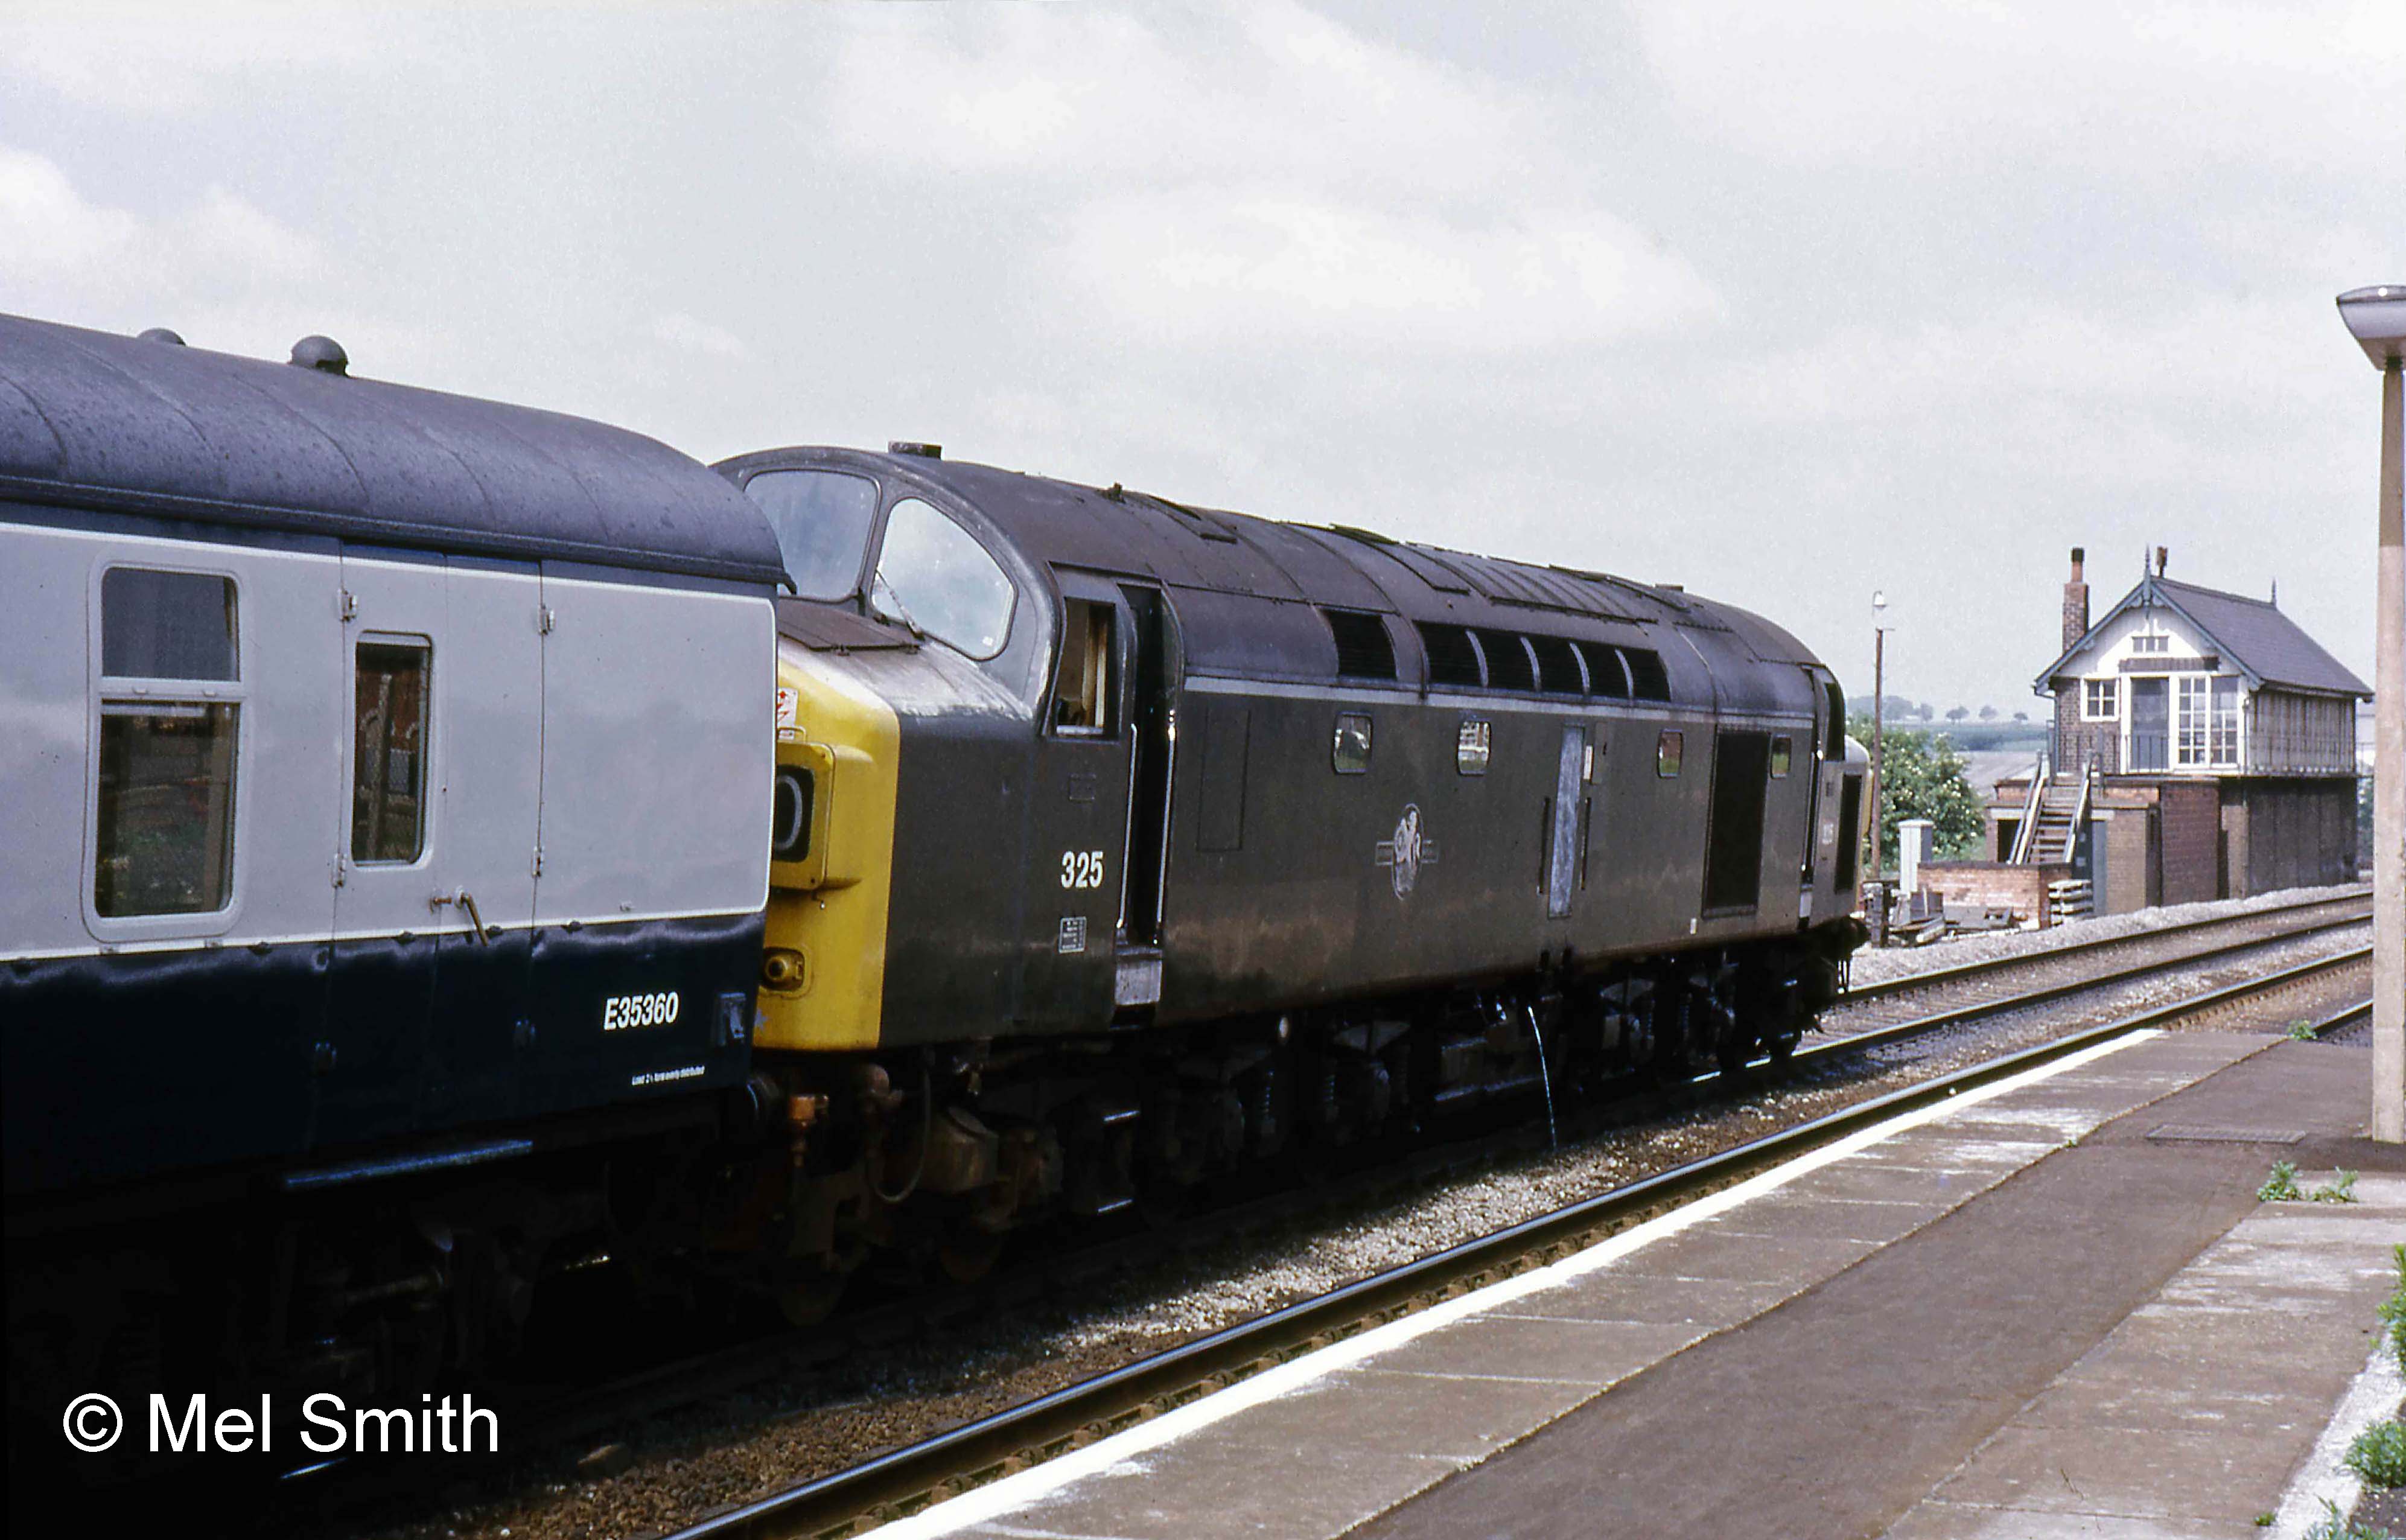 A slightly later view with the box nameboard removed. Photograph by Mel Smith.